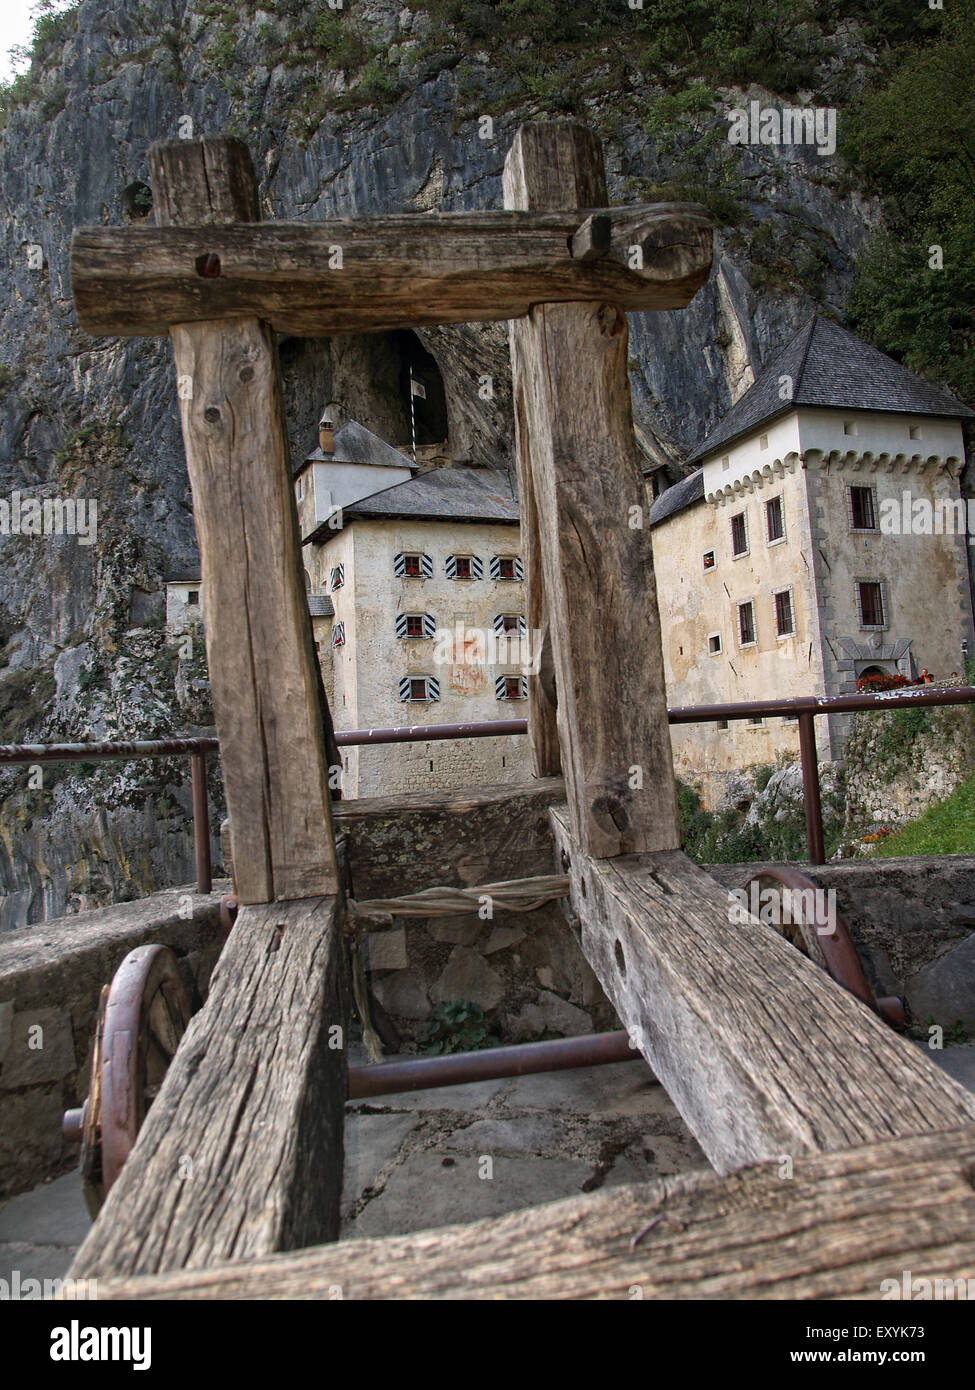 Wood catapult with Predjama castle, a renaissance castle built in a cave, at the background, near Postojna. Slovenia. Stock Photo